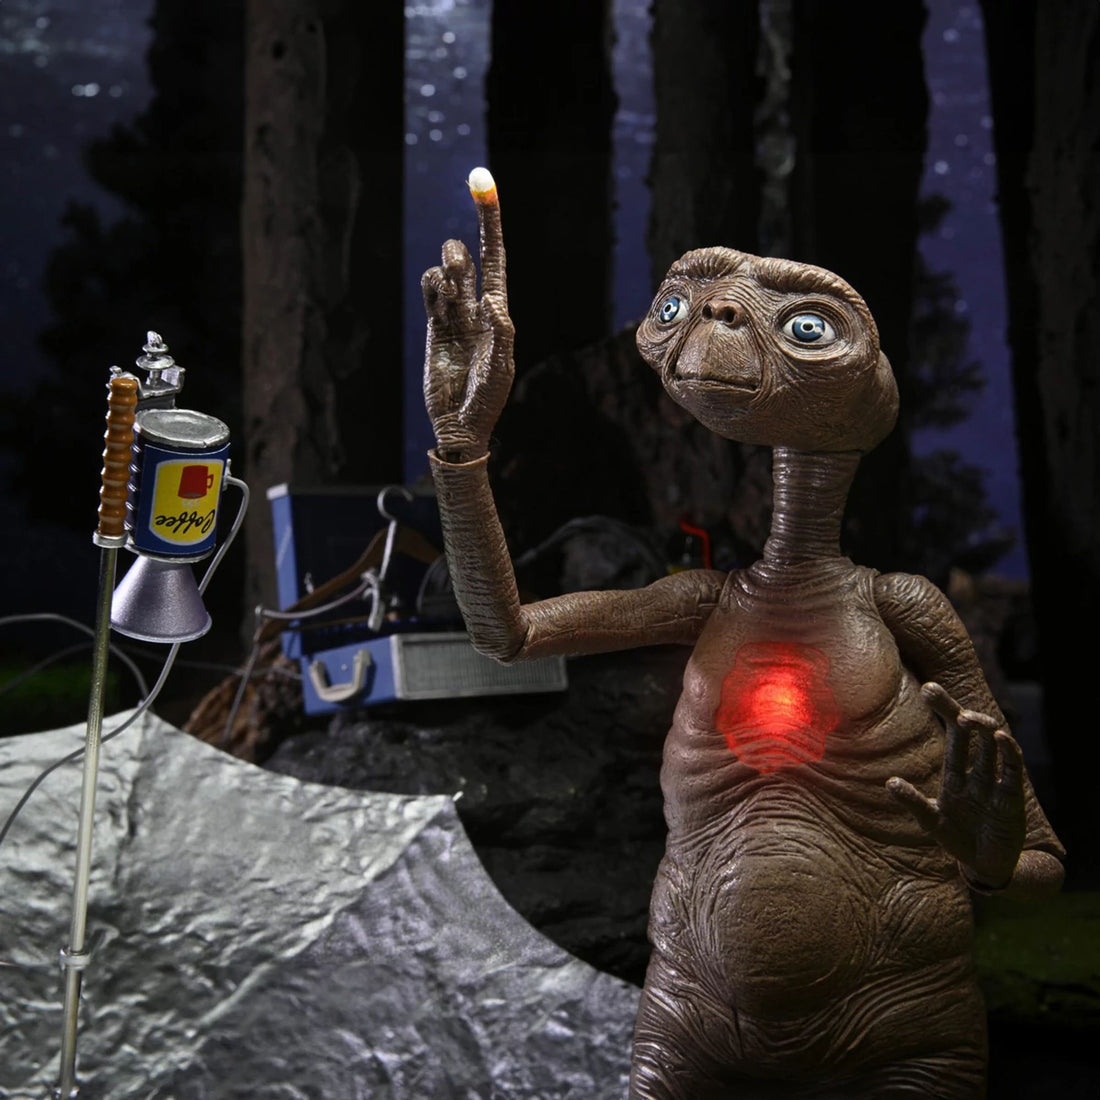 E.T. 40TH ANNIVERSARY - 7&quot; SCALE ACTION FIGURE - ULTIMATE DELUXE E.T. W LED CHEST